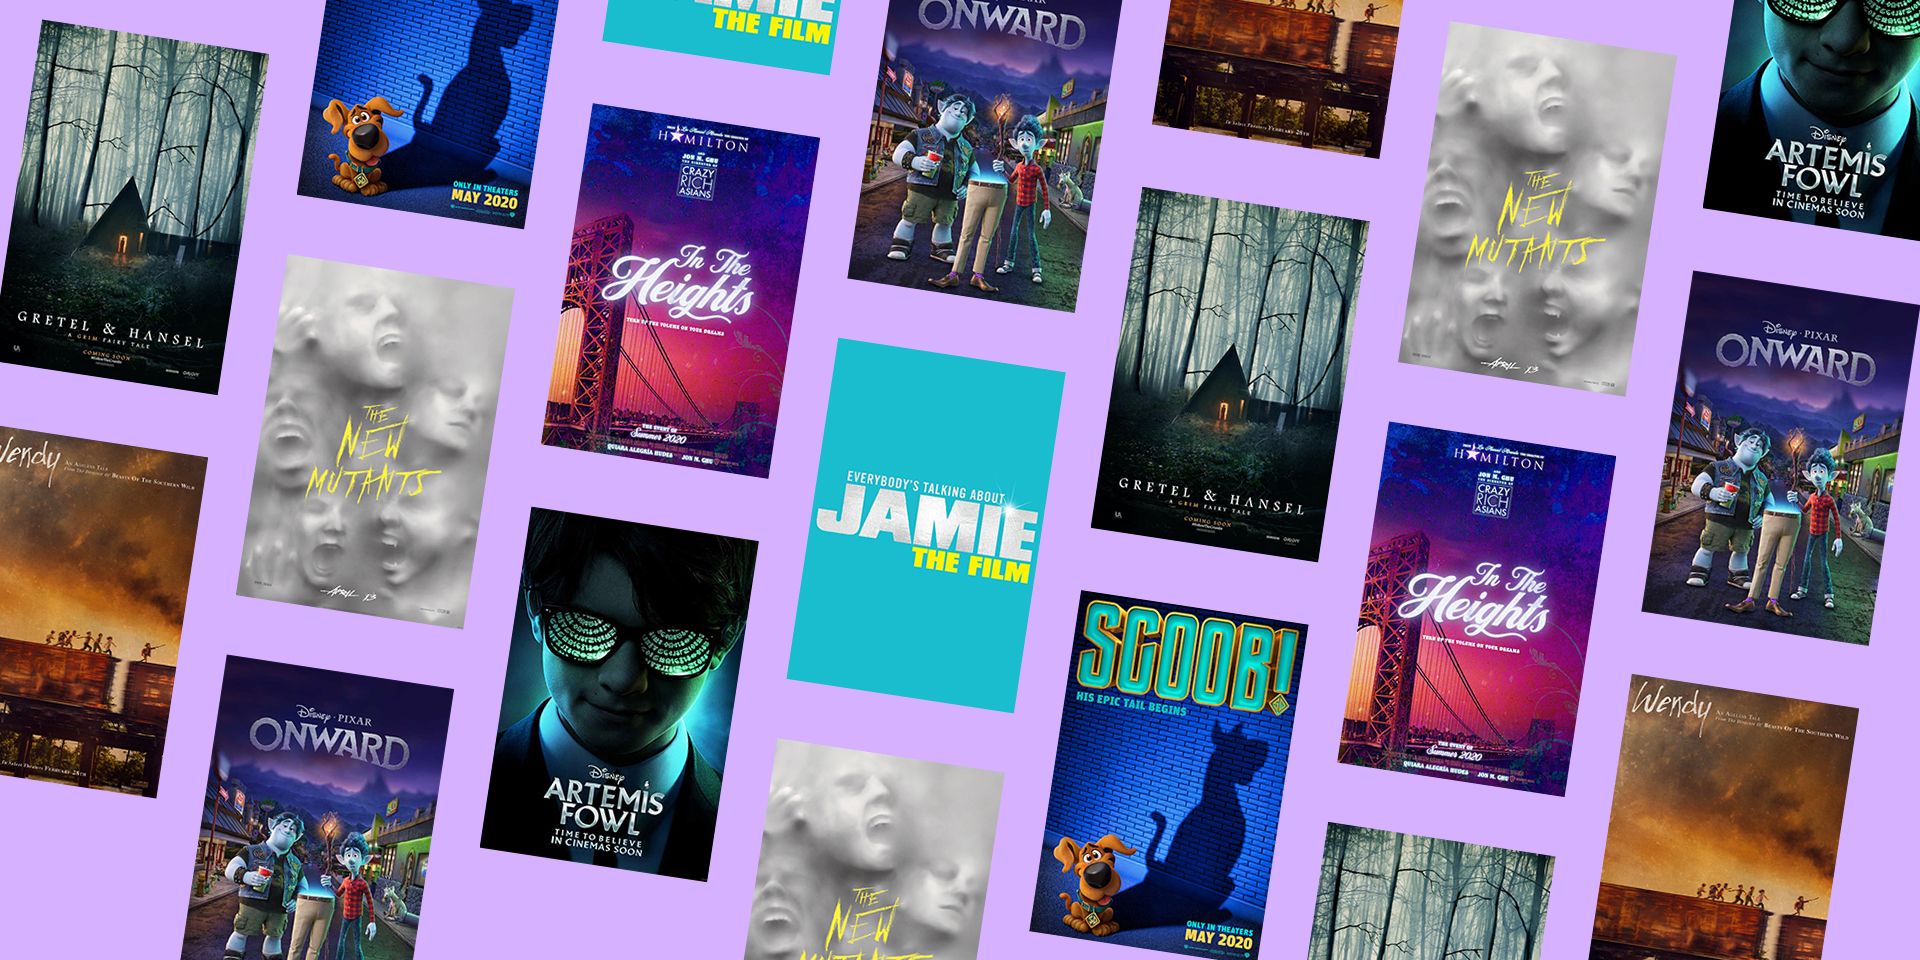 The Best Movies Of 2020, Movies